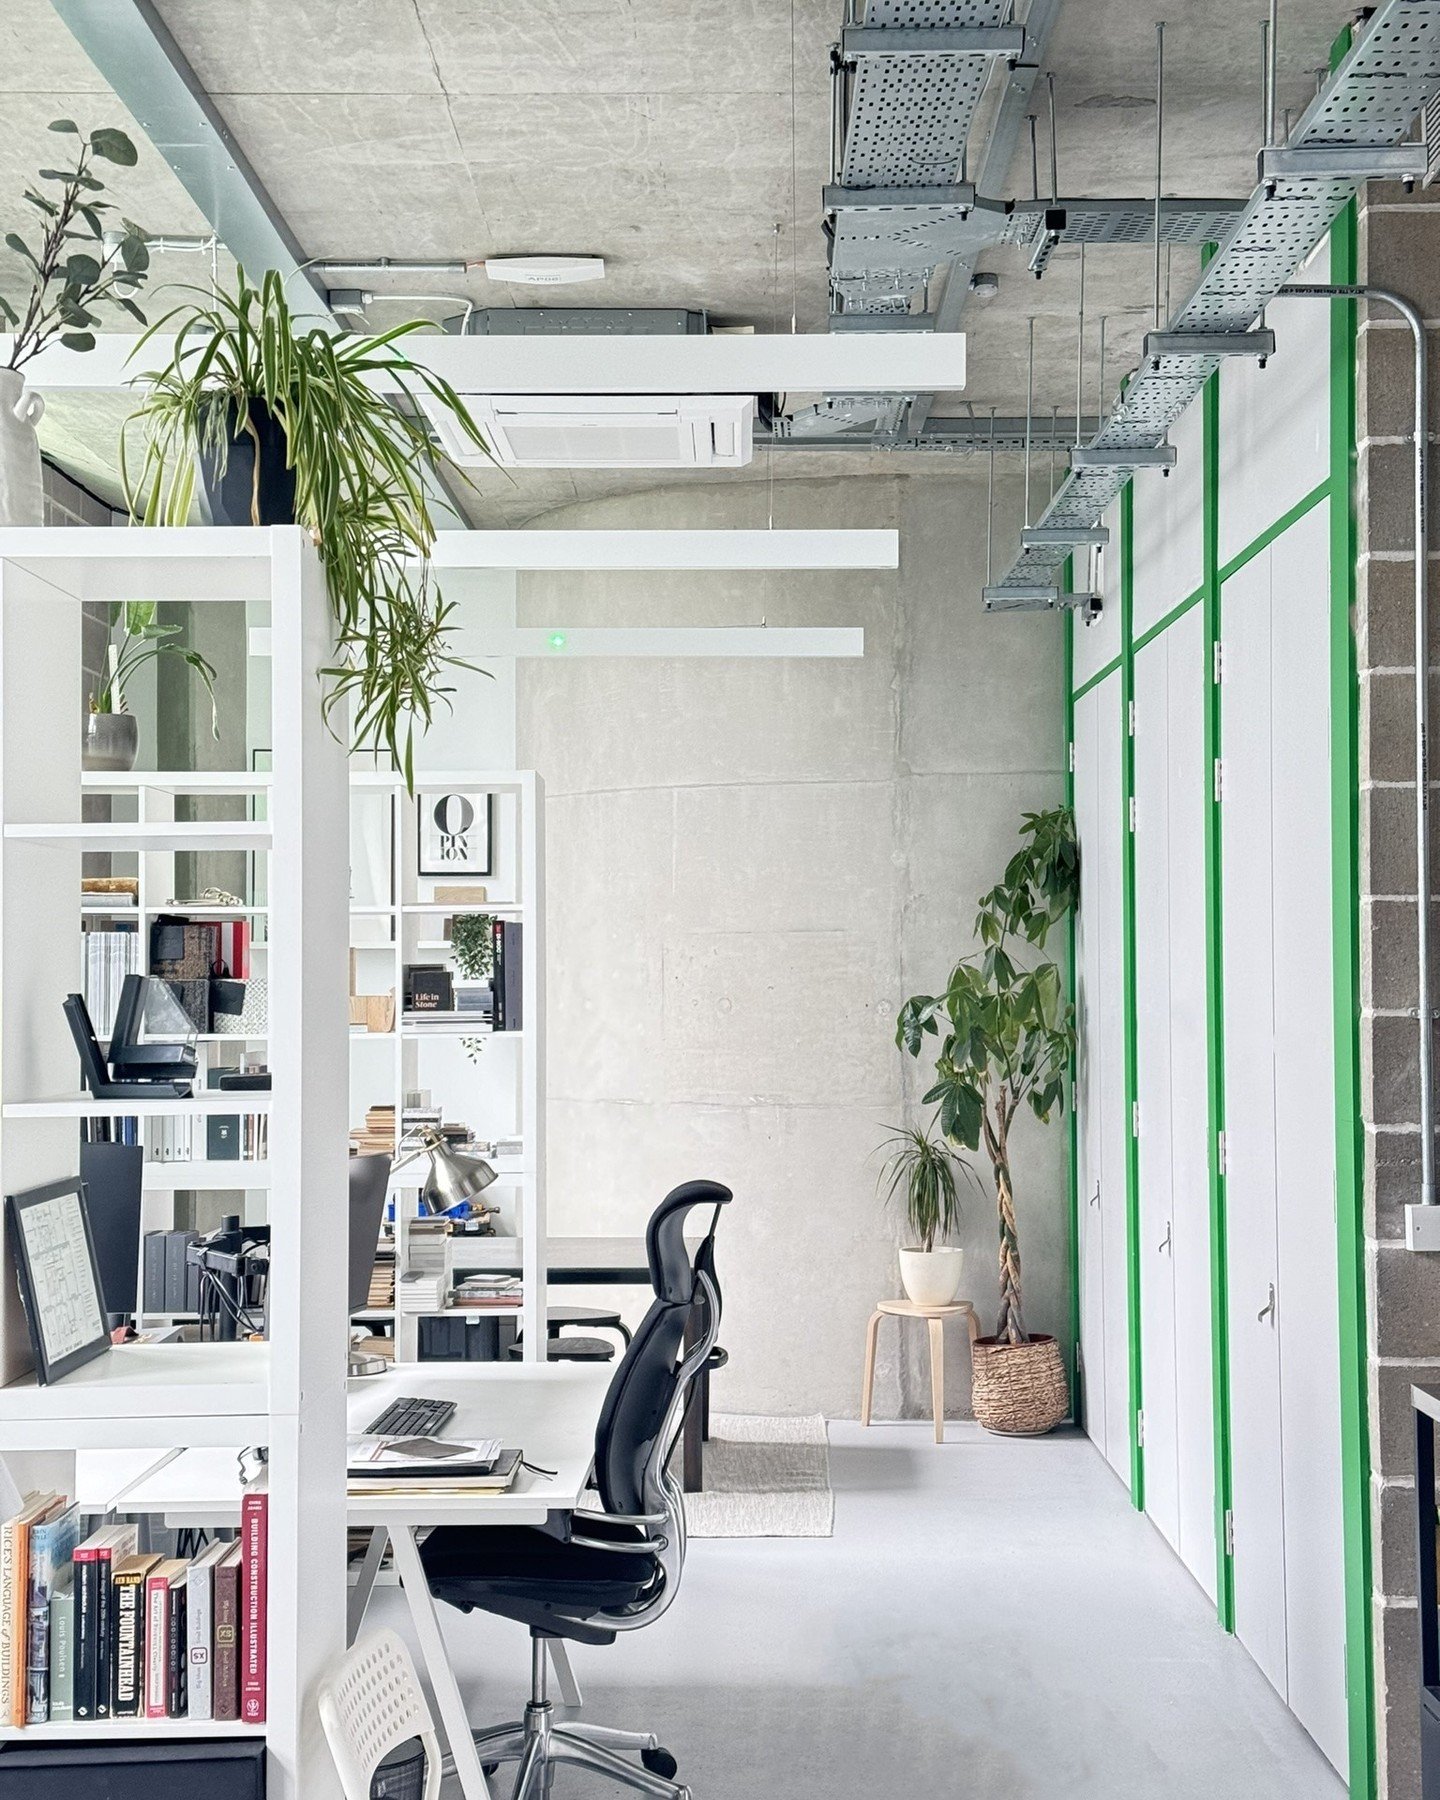 GKA | New Office | Design District | 

This week has been very exciting for our studio and team. We have just moved into a new office space on the Greenwich peninsula. Located in the heart of the Design District and just a short walk from North Green